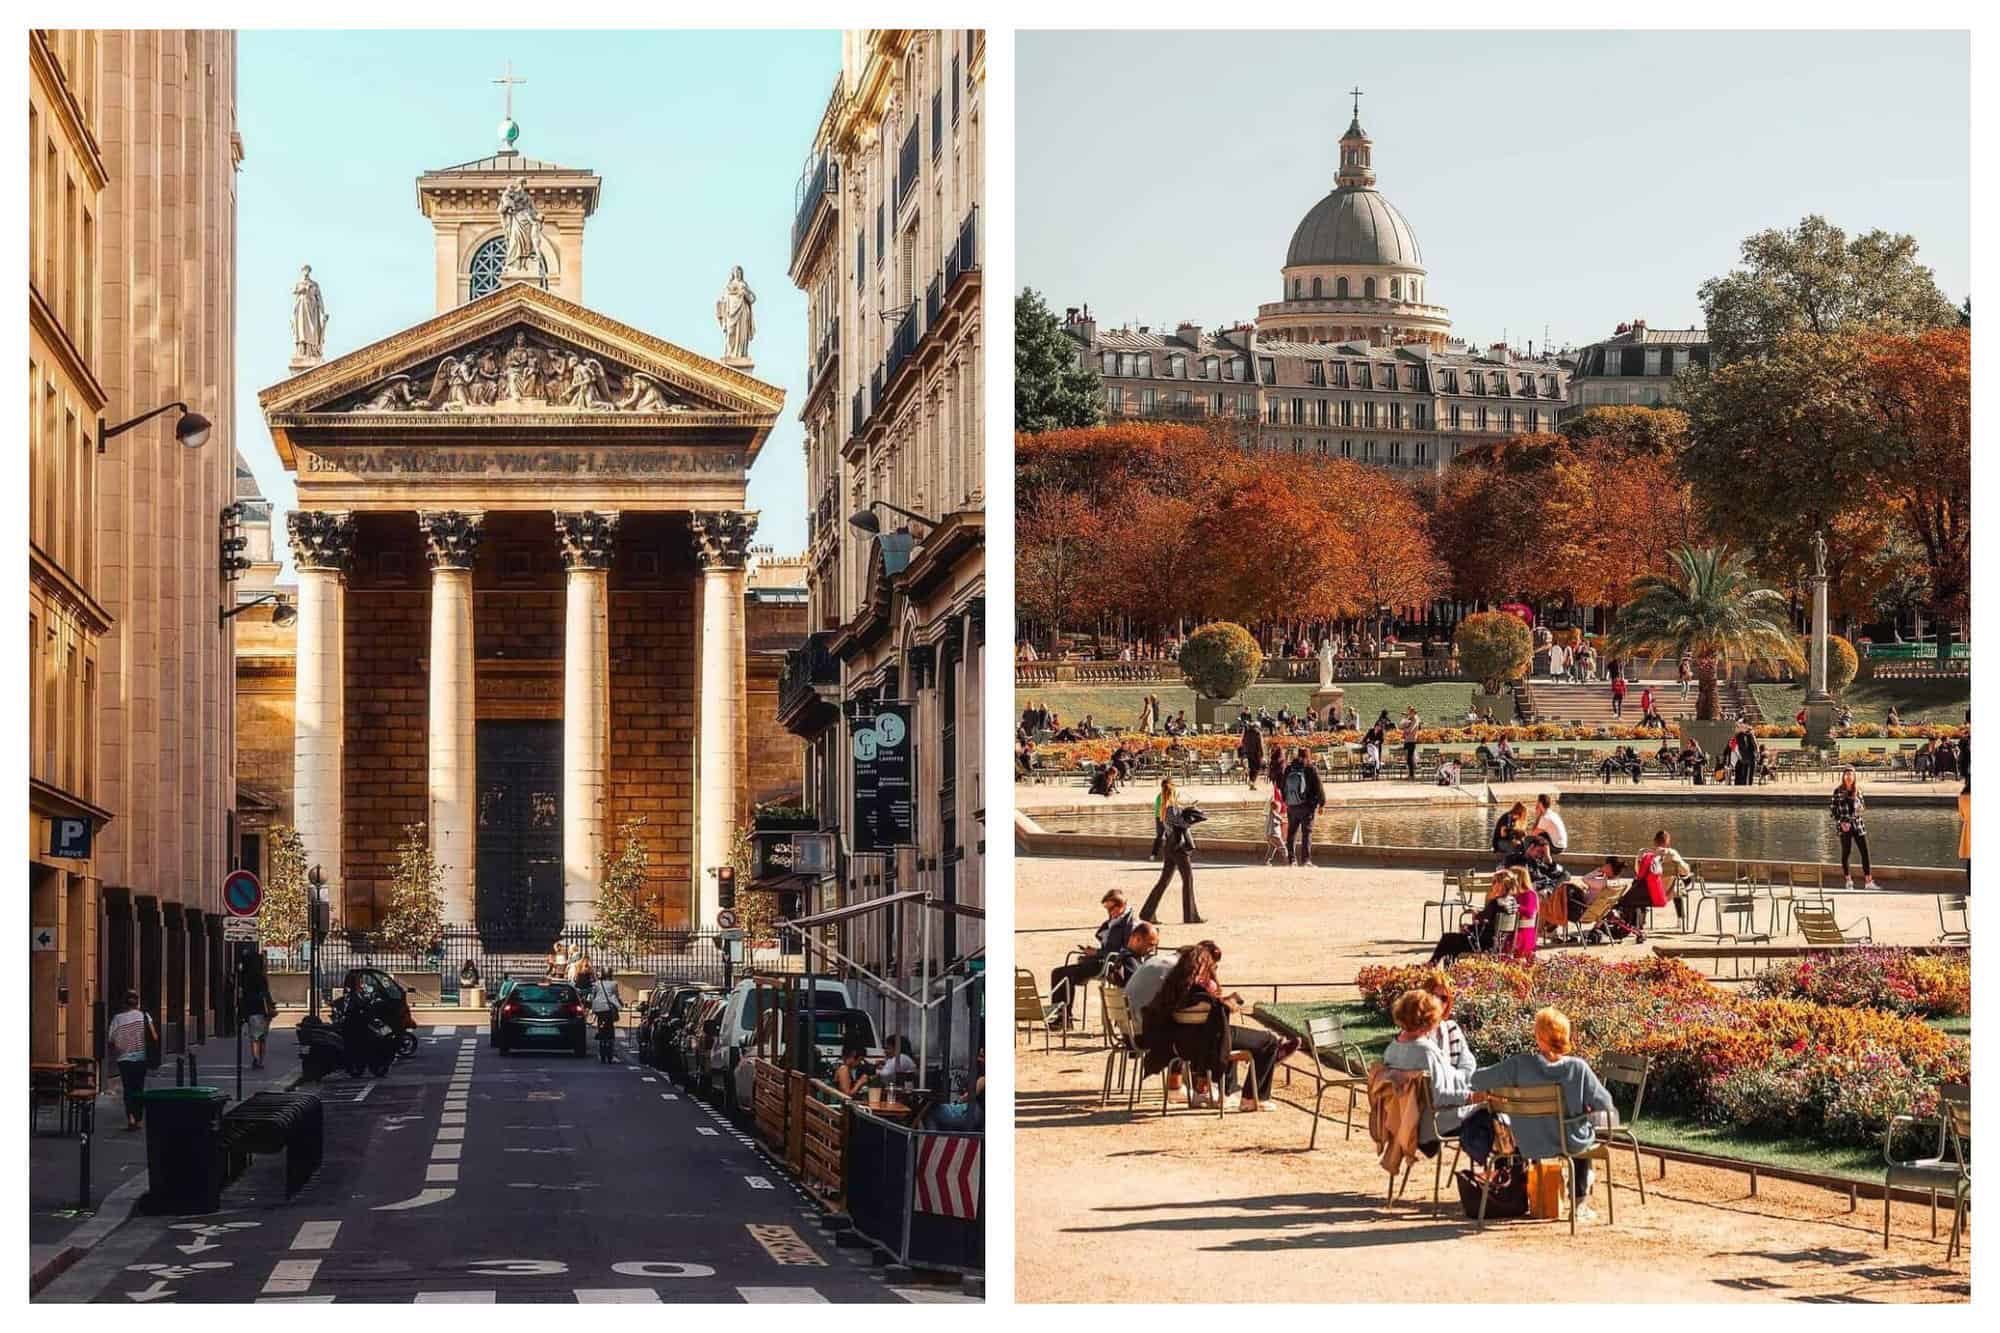 Left: An old church with greek-fashioned beige pillars. Right: Parisians are sitting in gray chairs in a park surrounded by trees with brown leaves.